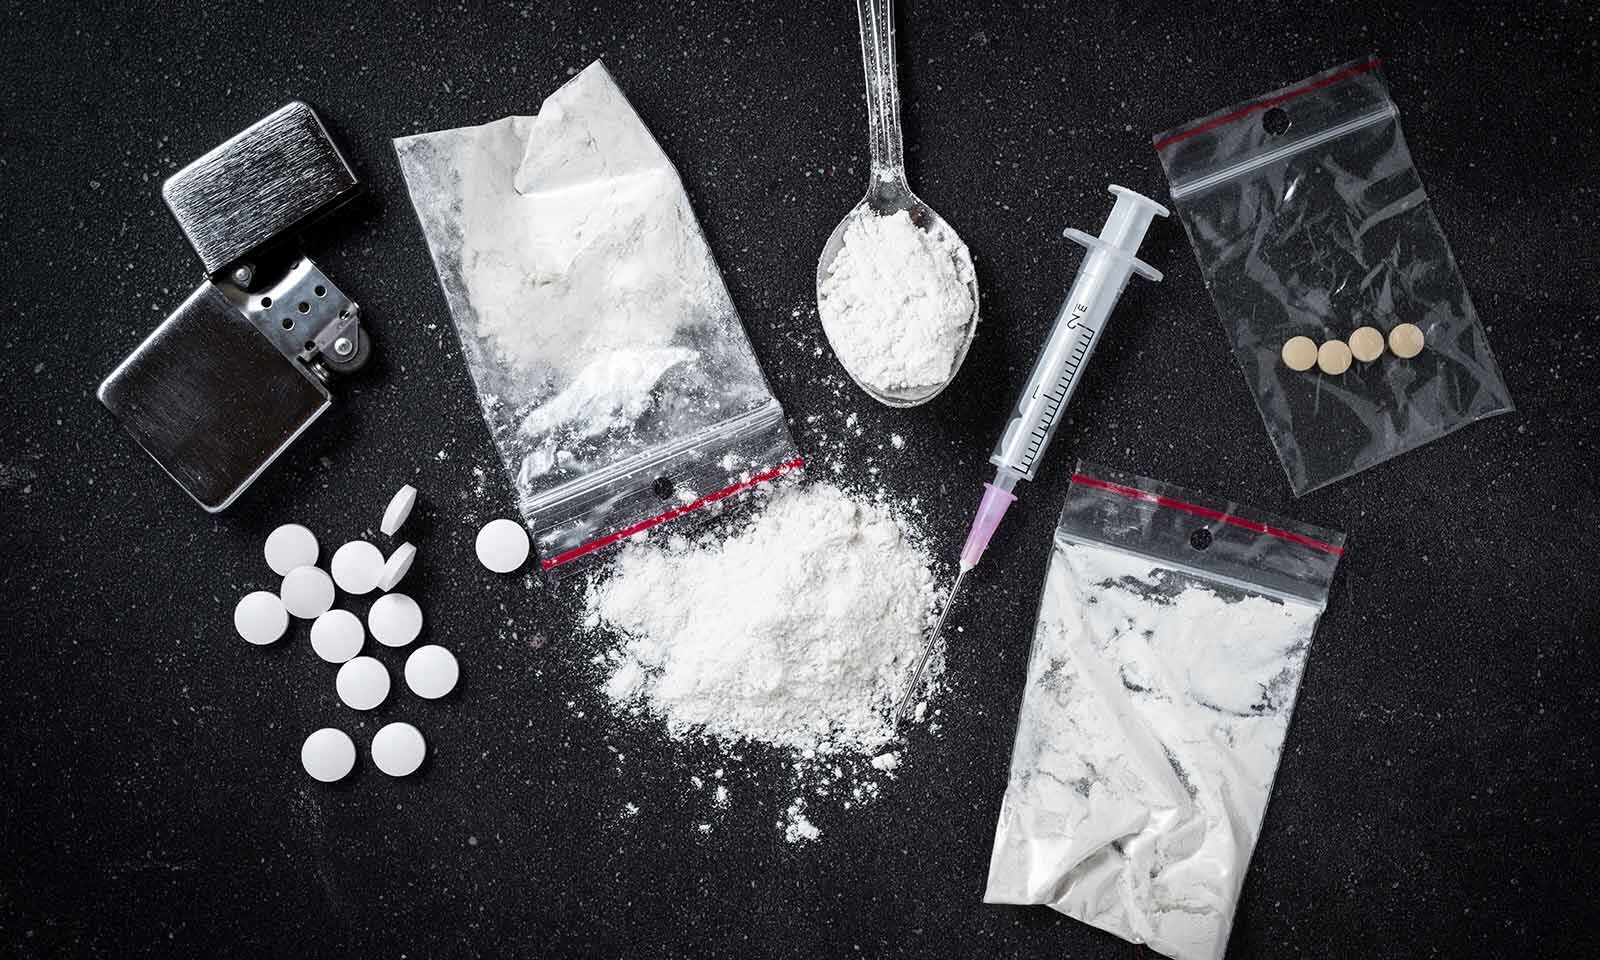 The Enforcement Directorate (ED) has issued summons to several industry celebrities on drugs case